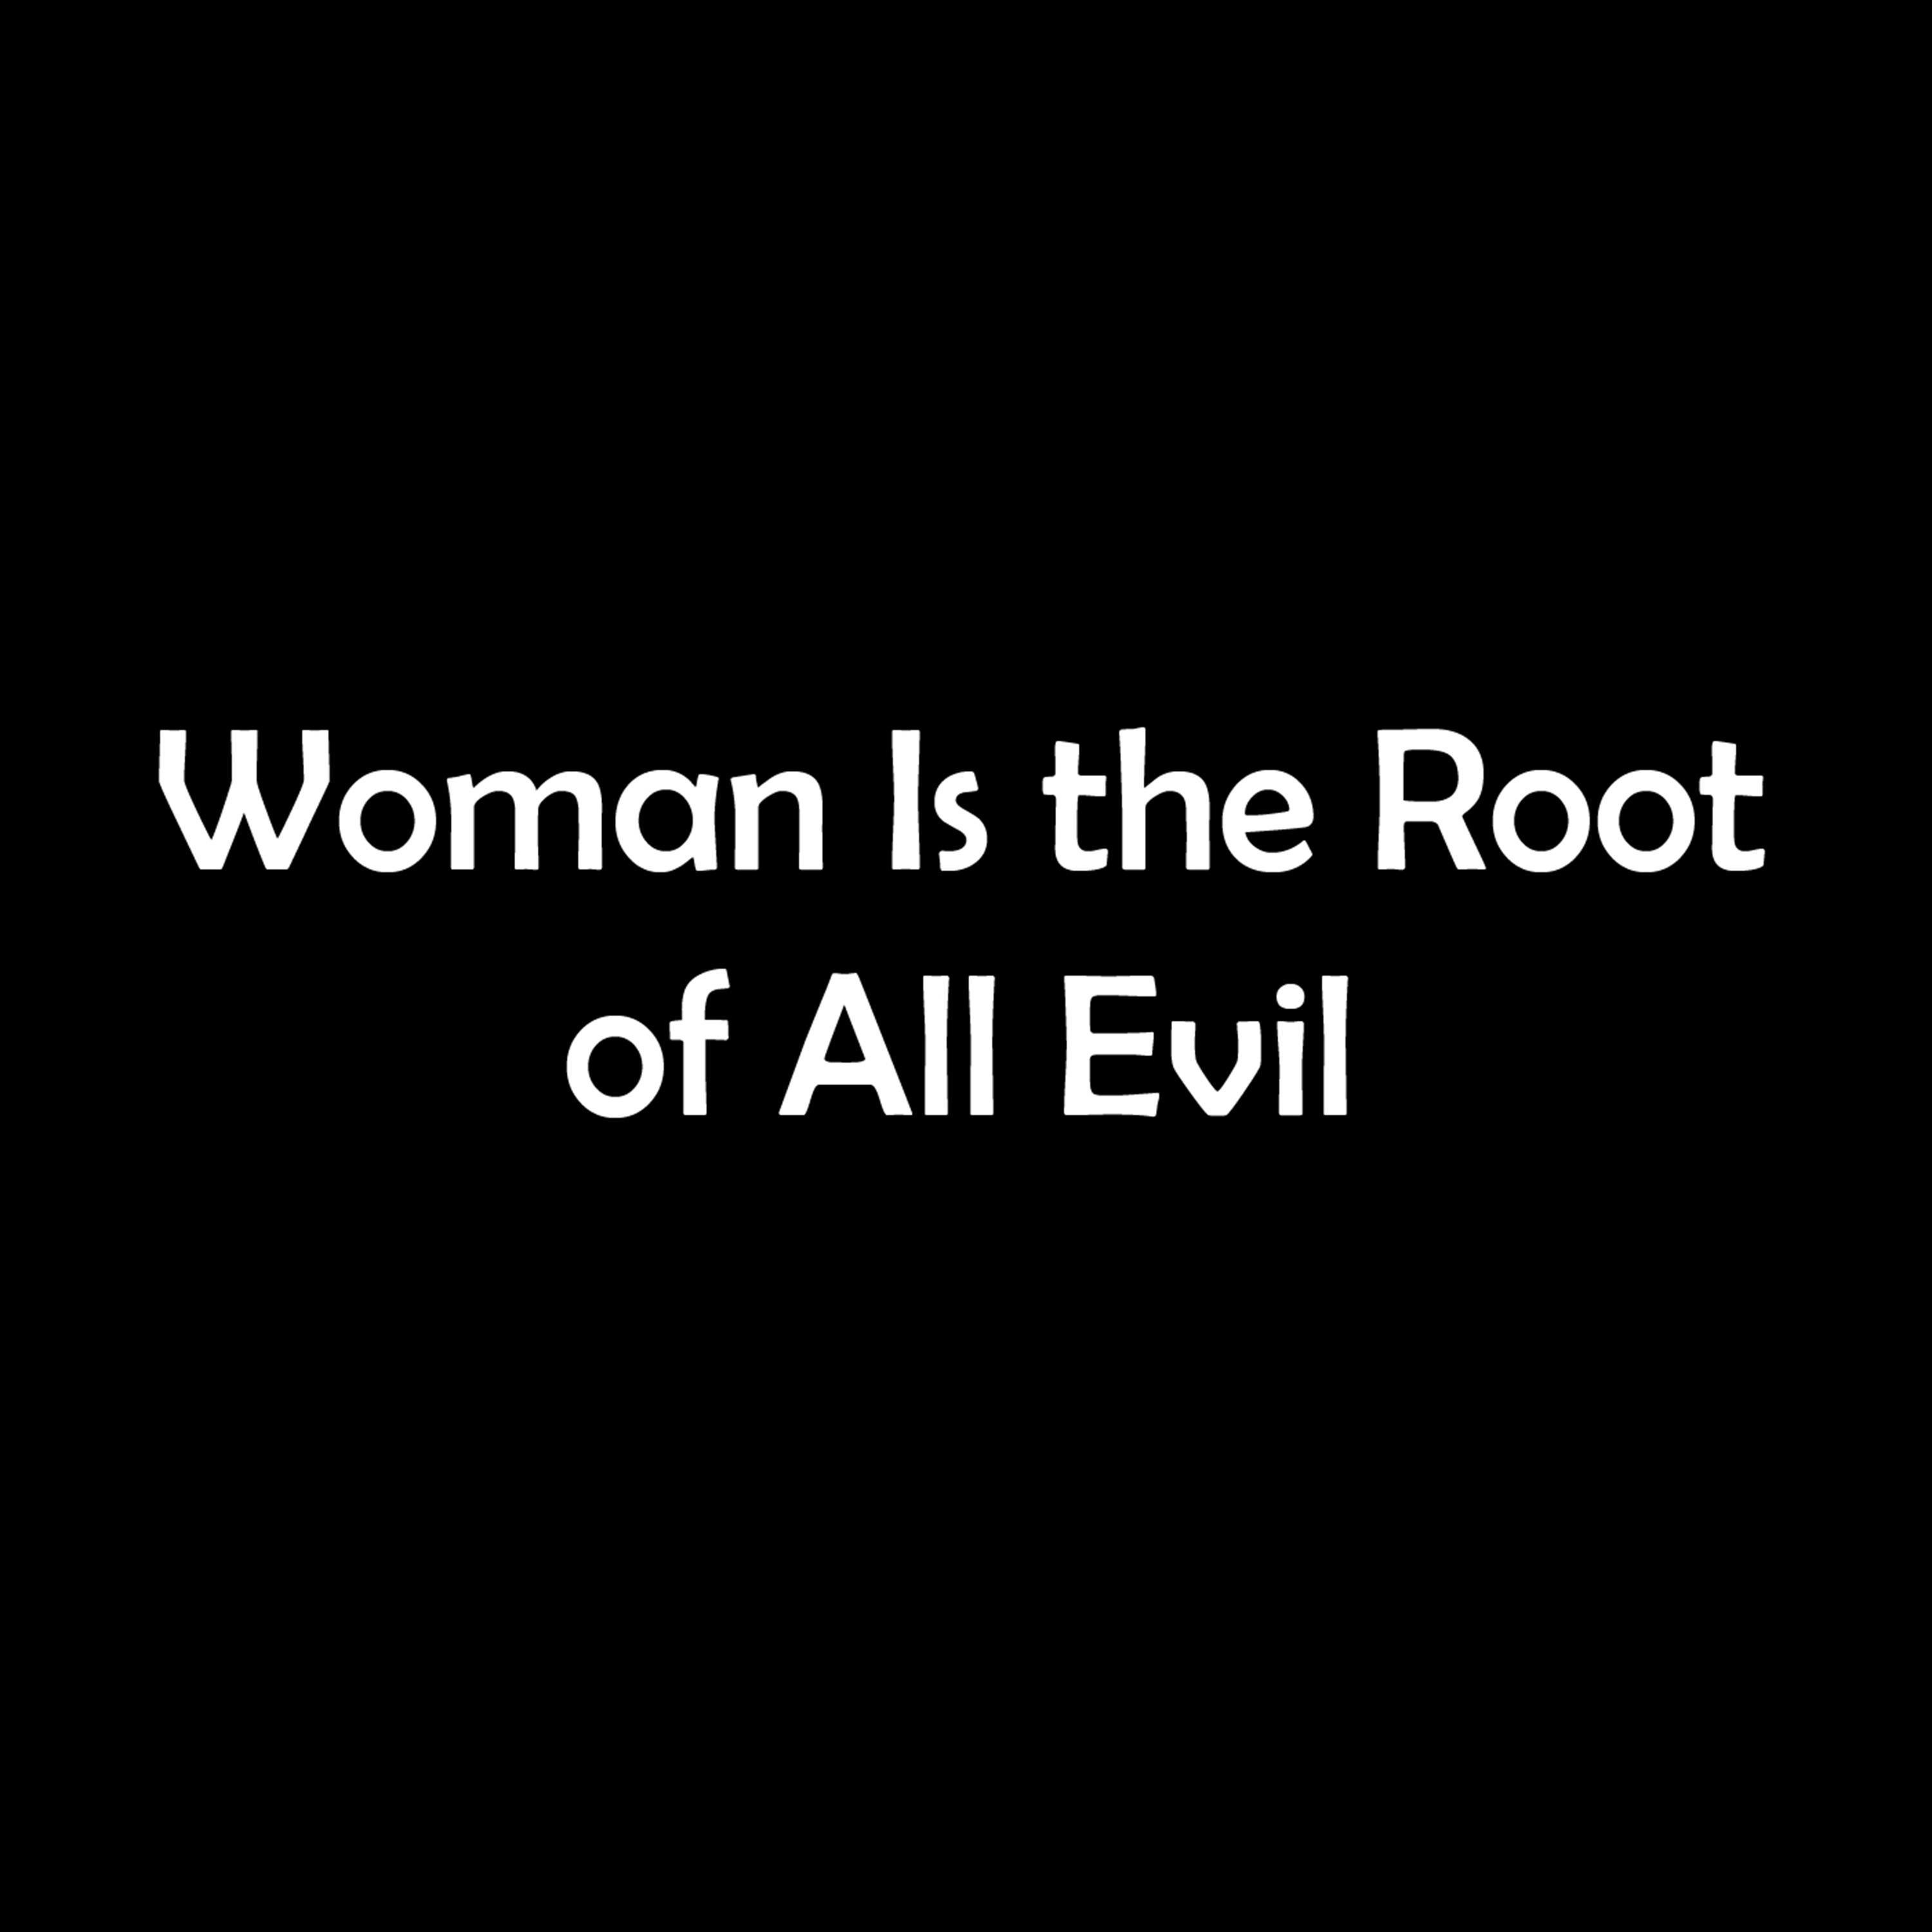 Woman Is the Root of All Evil